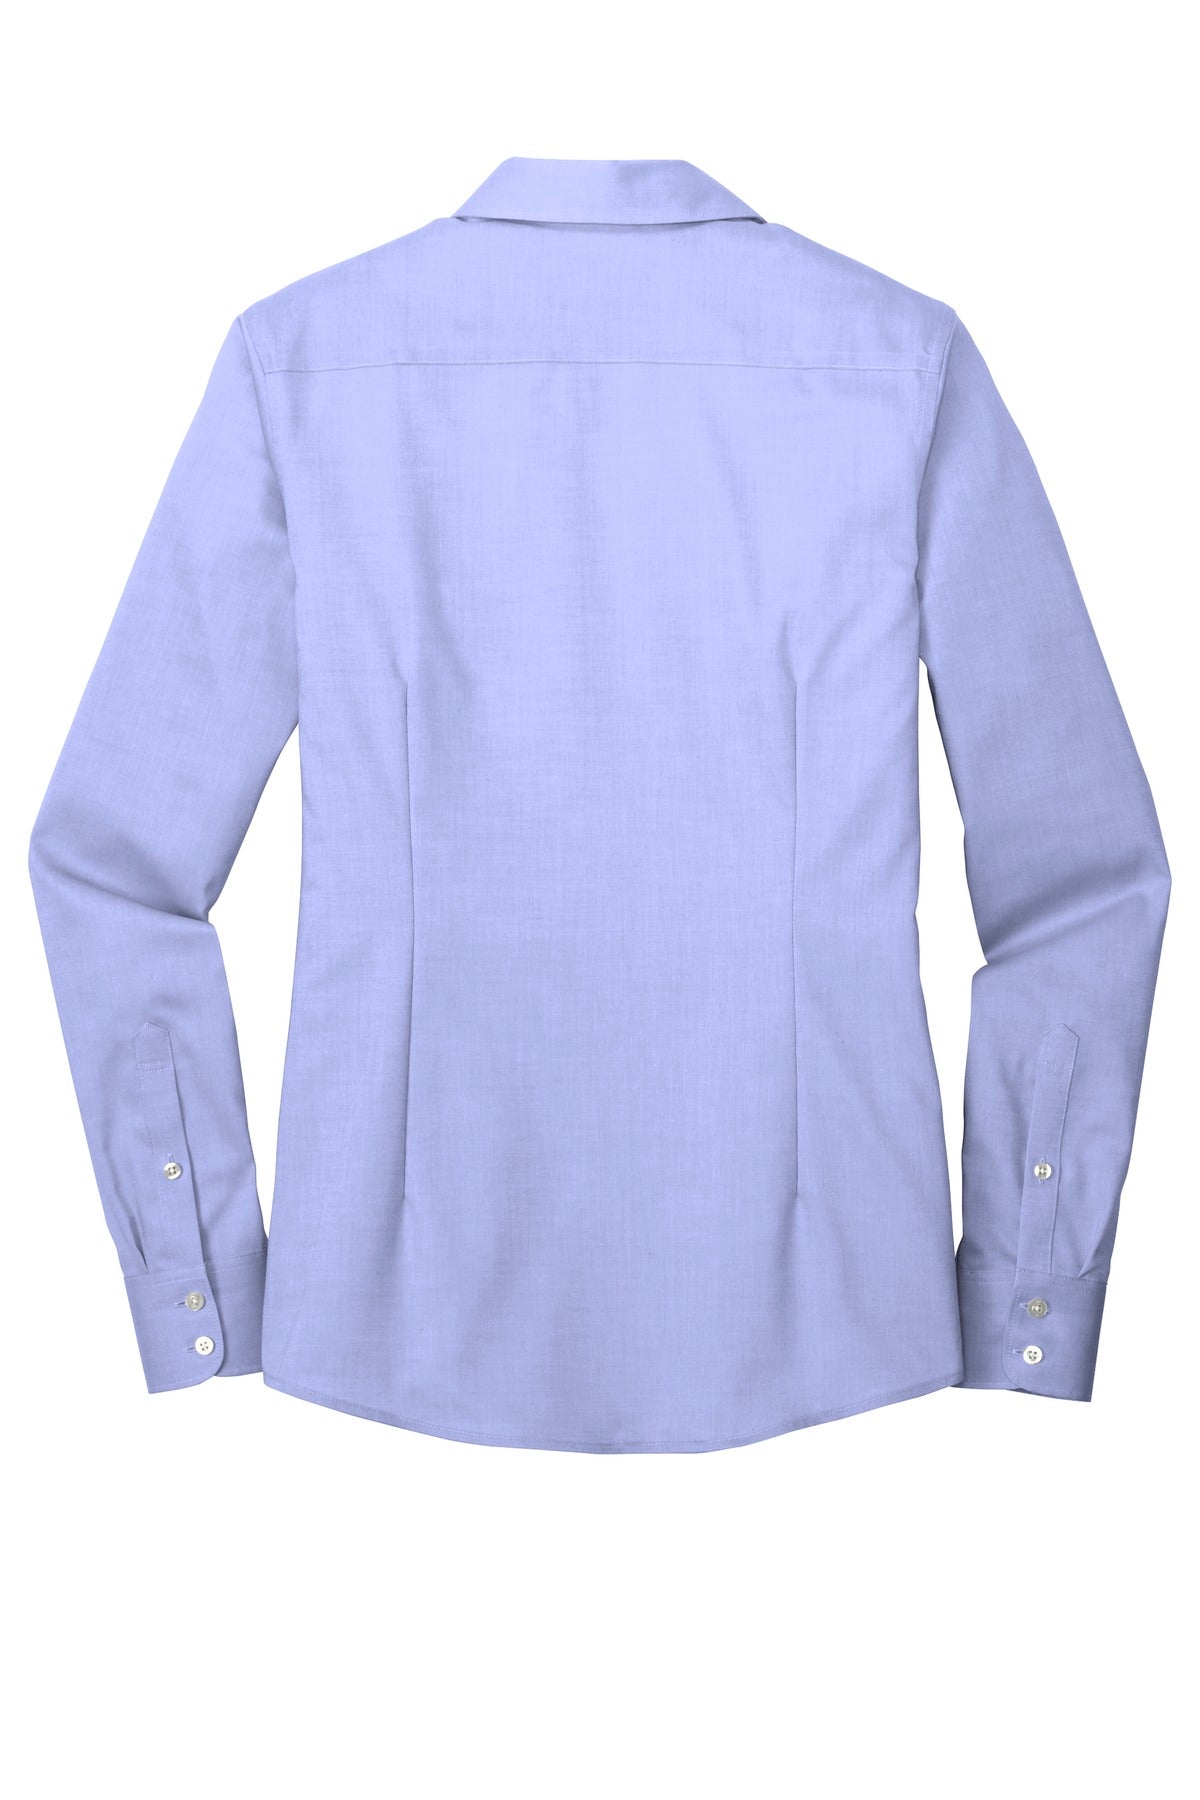 Red House Ladies Pinpoint Oxford Non-Iron Shirt. RH250